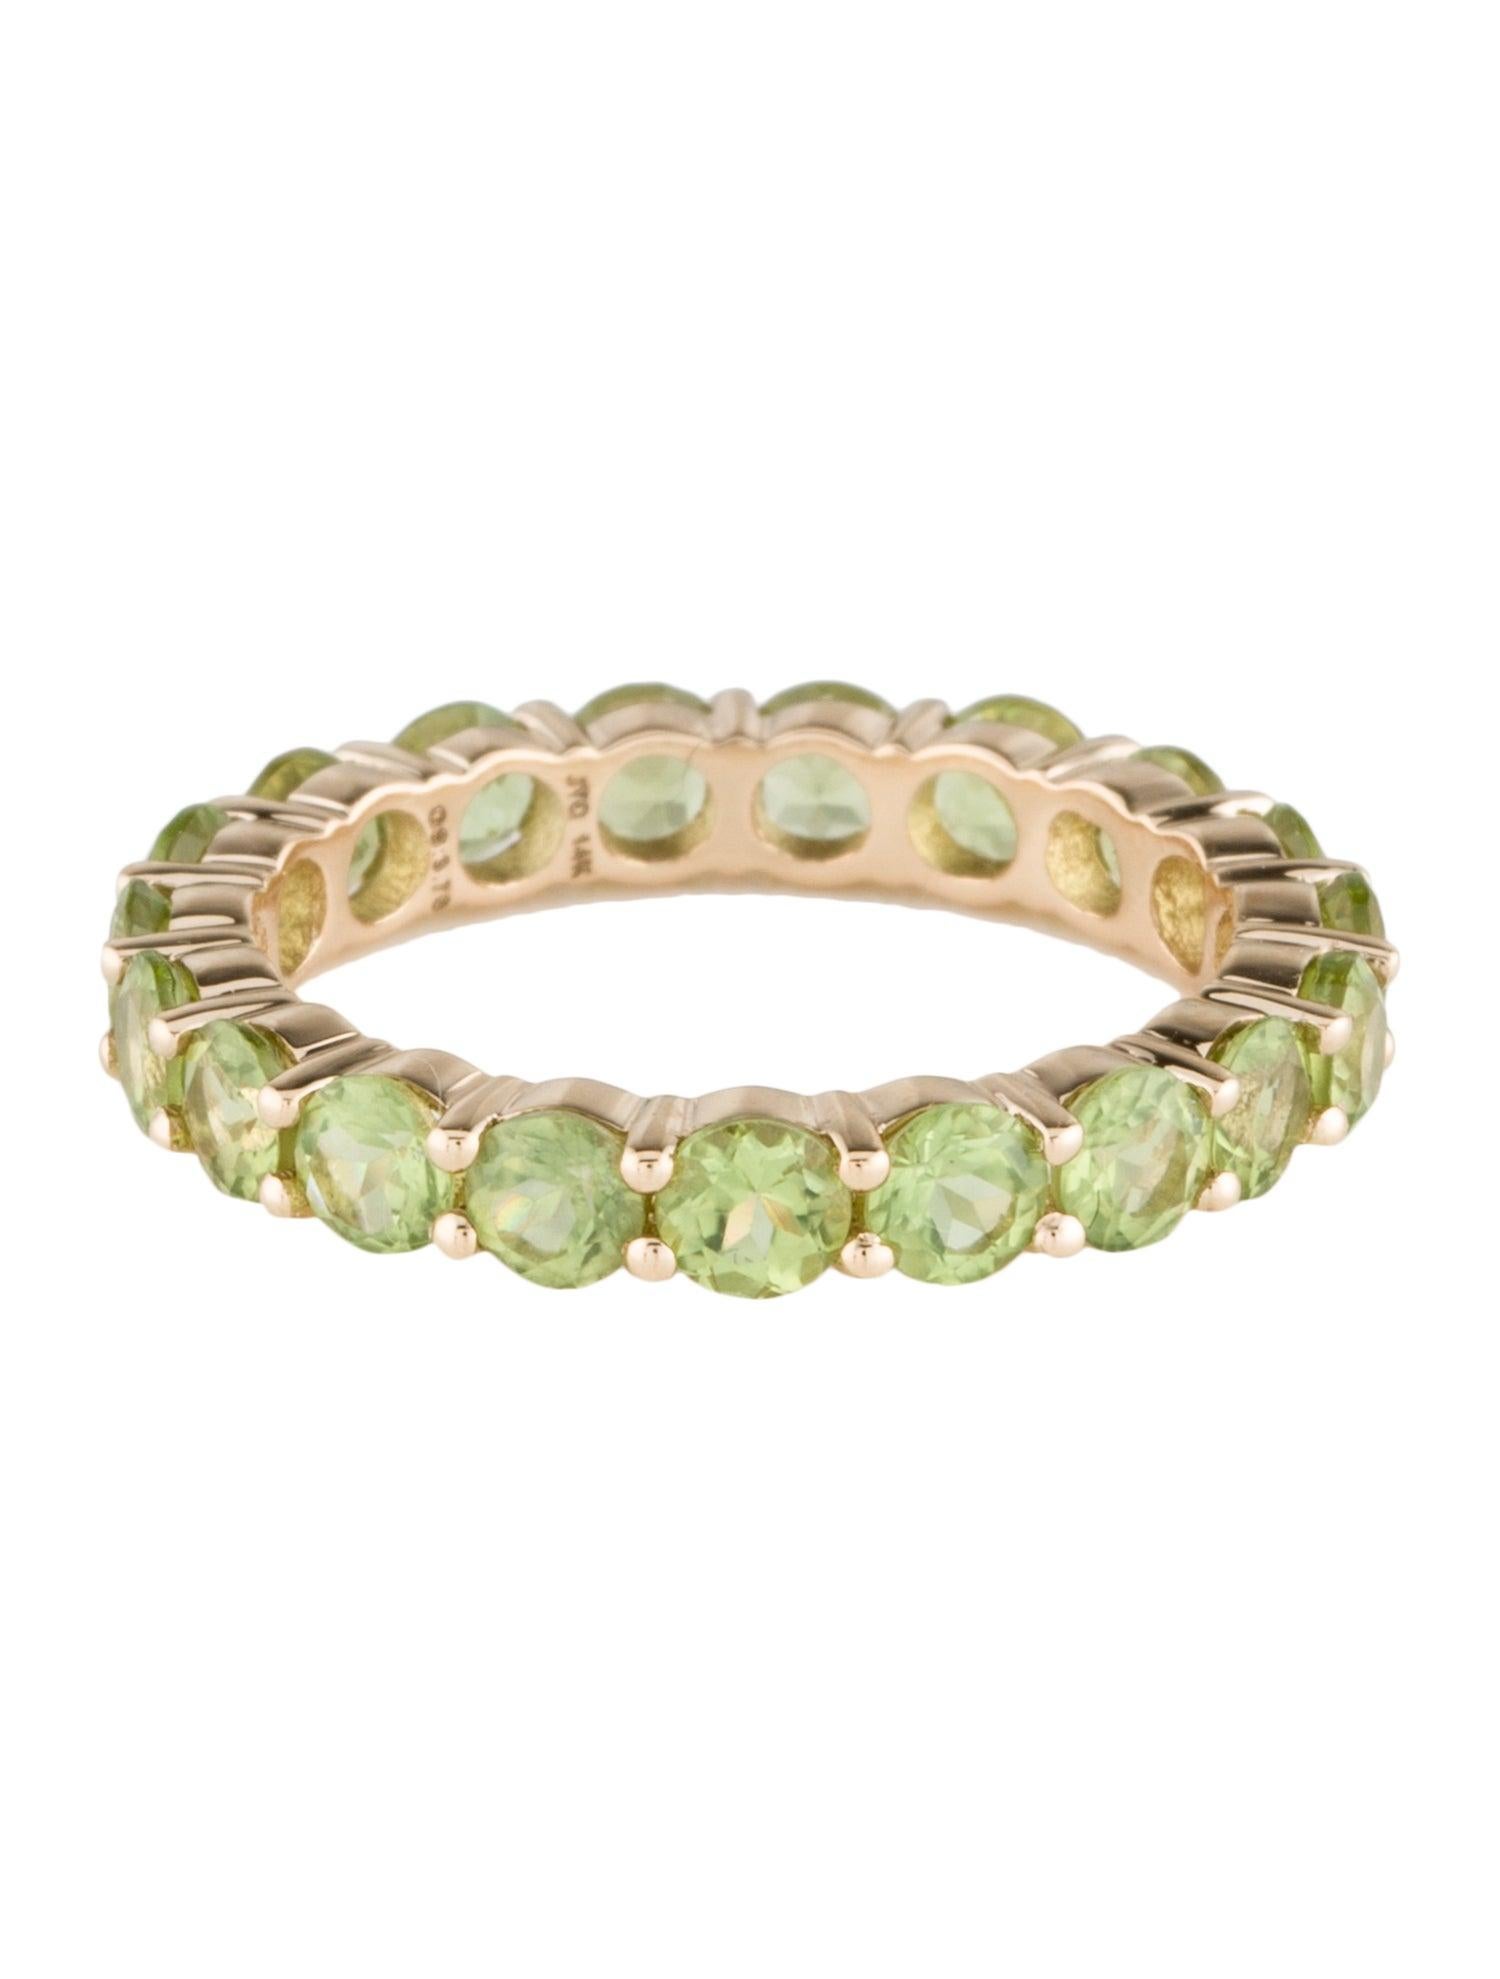 Embrace timeless elegance with our 14K Yellow Gold Eternity Band, adorned with nineteen faceted round Peridots, each exuding a vibrant green hue. This exquisite band captures the essence of eternal beauty, symbolized by the continuous circle of